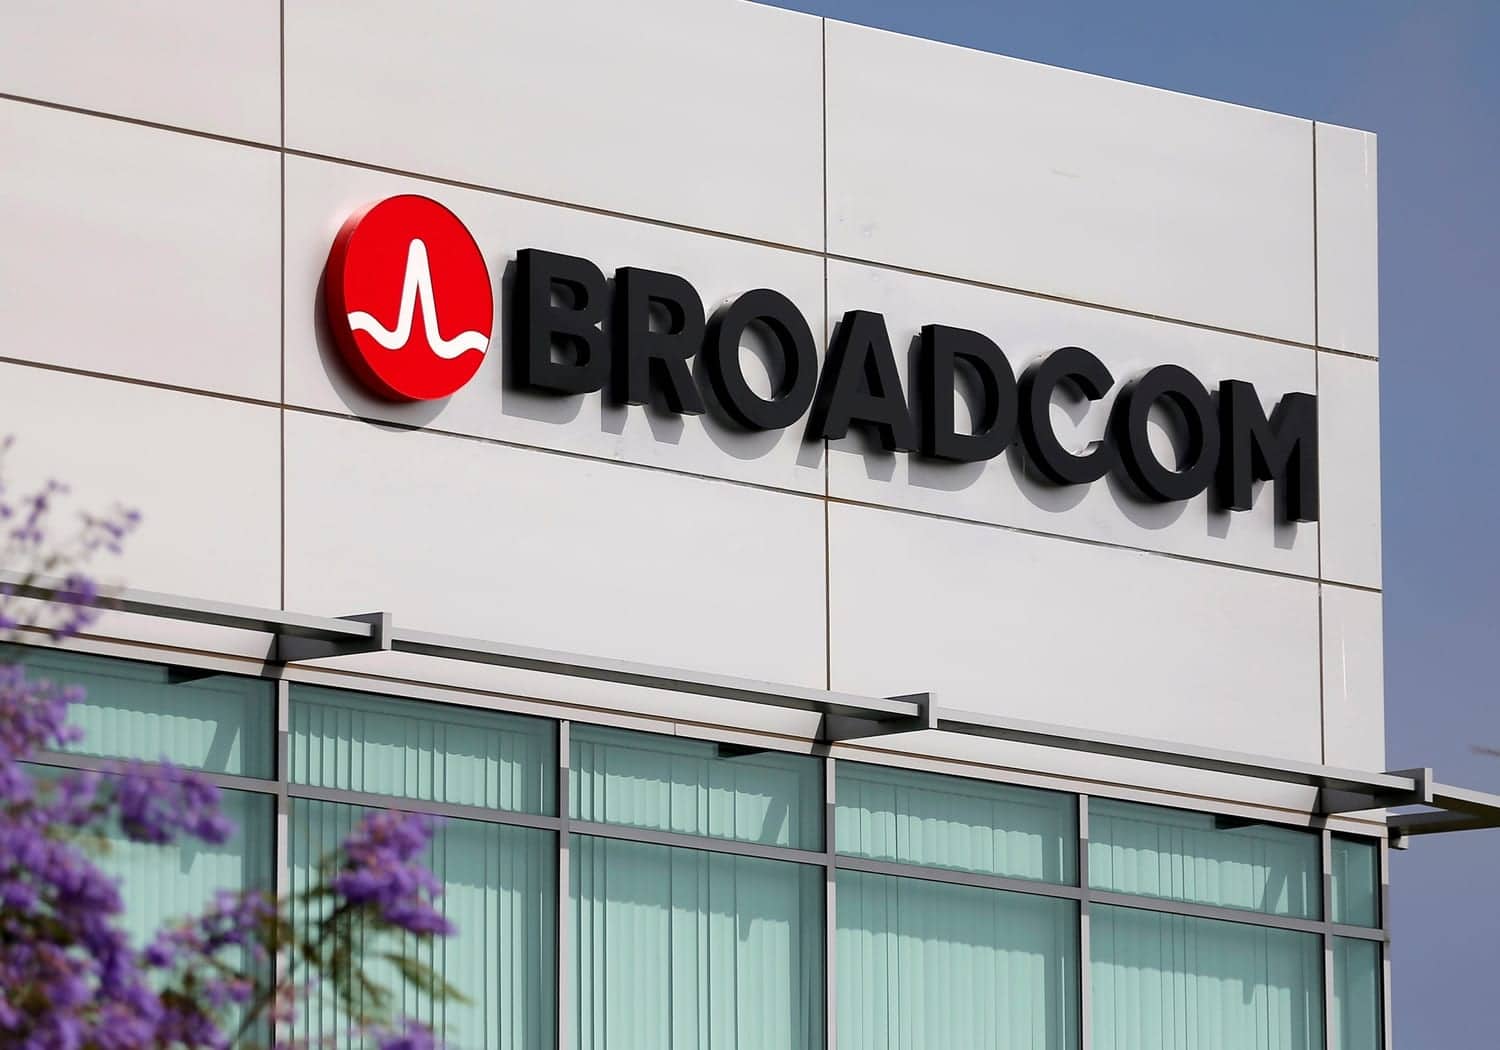 Apple struck a multibillion-dollar deal with Broadcom for 5G components made in the US.